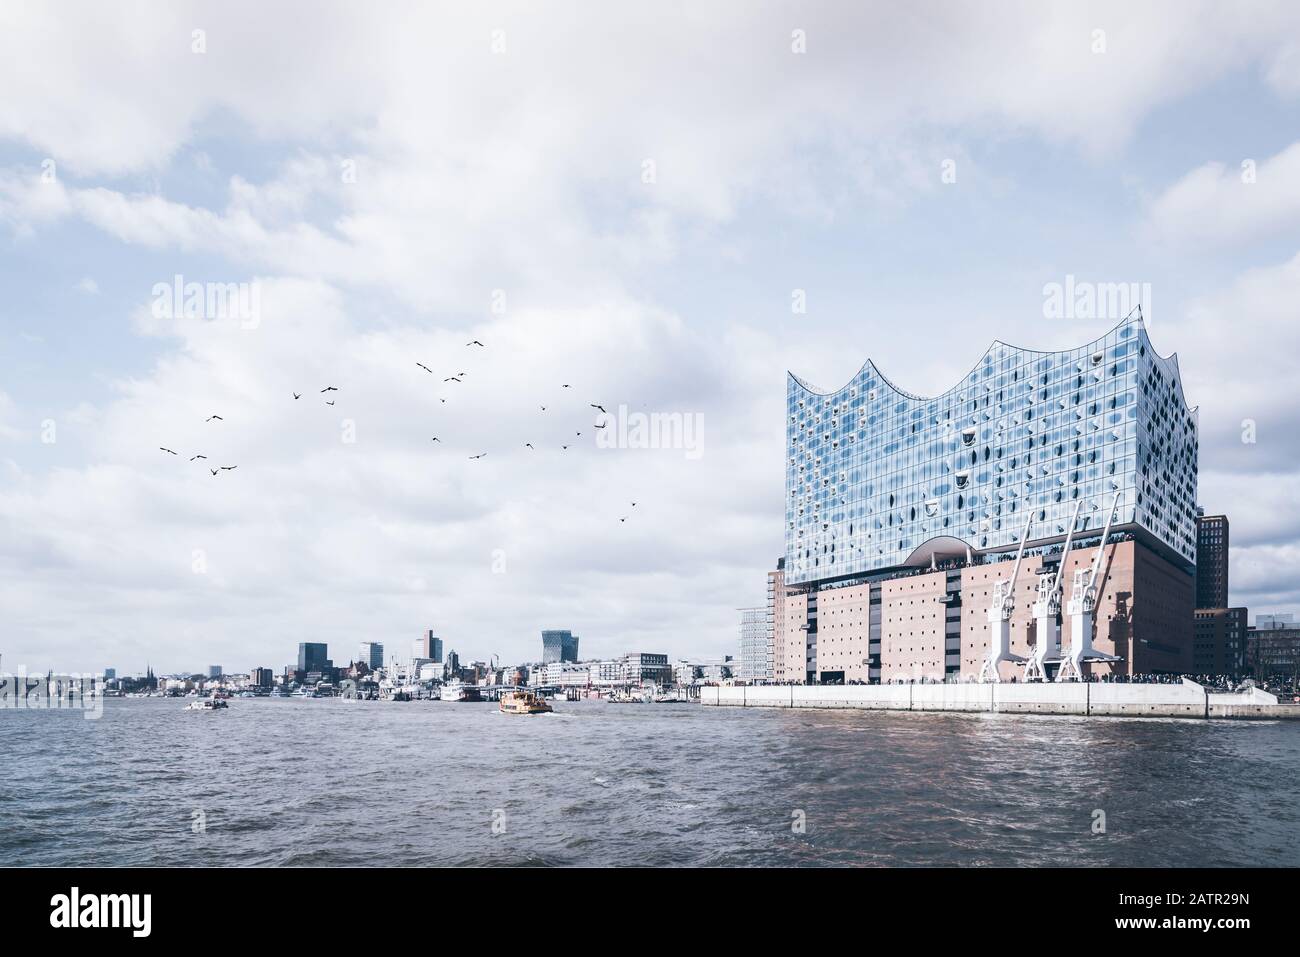 Hamburg, Germany 25 March 2017: Elbphilharmonie Concert Hall with Elbe river and waterfront Stock Photo